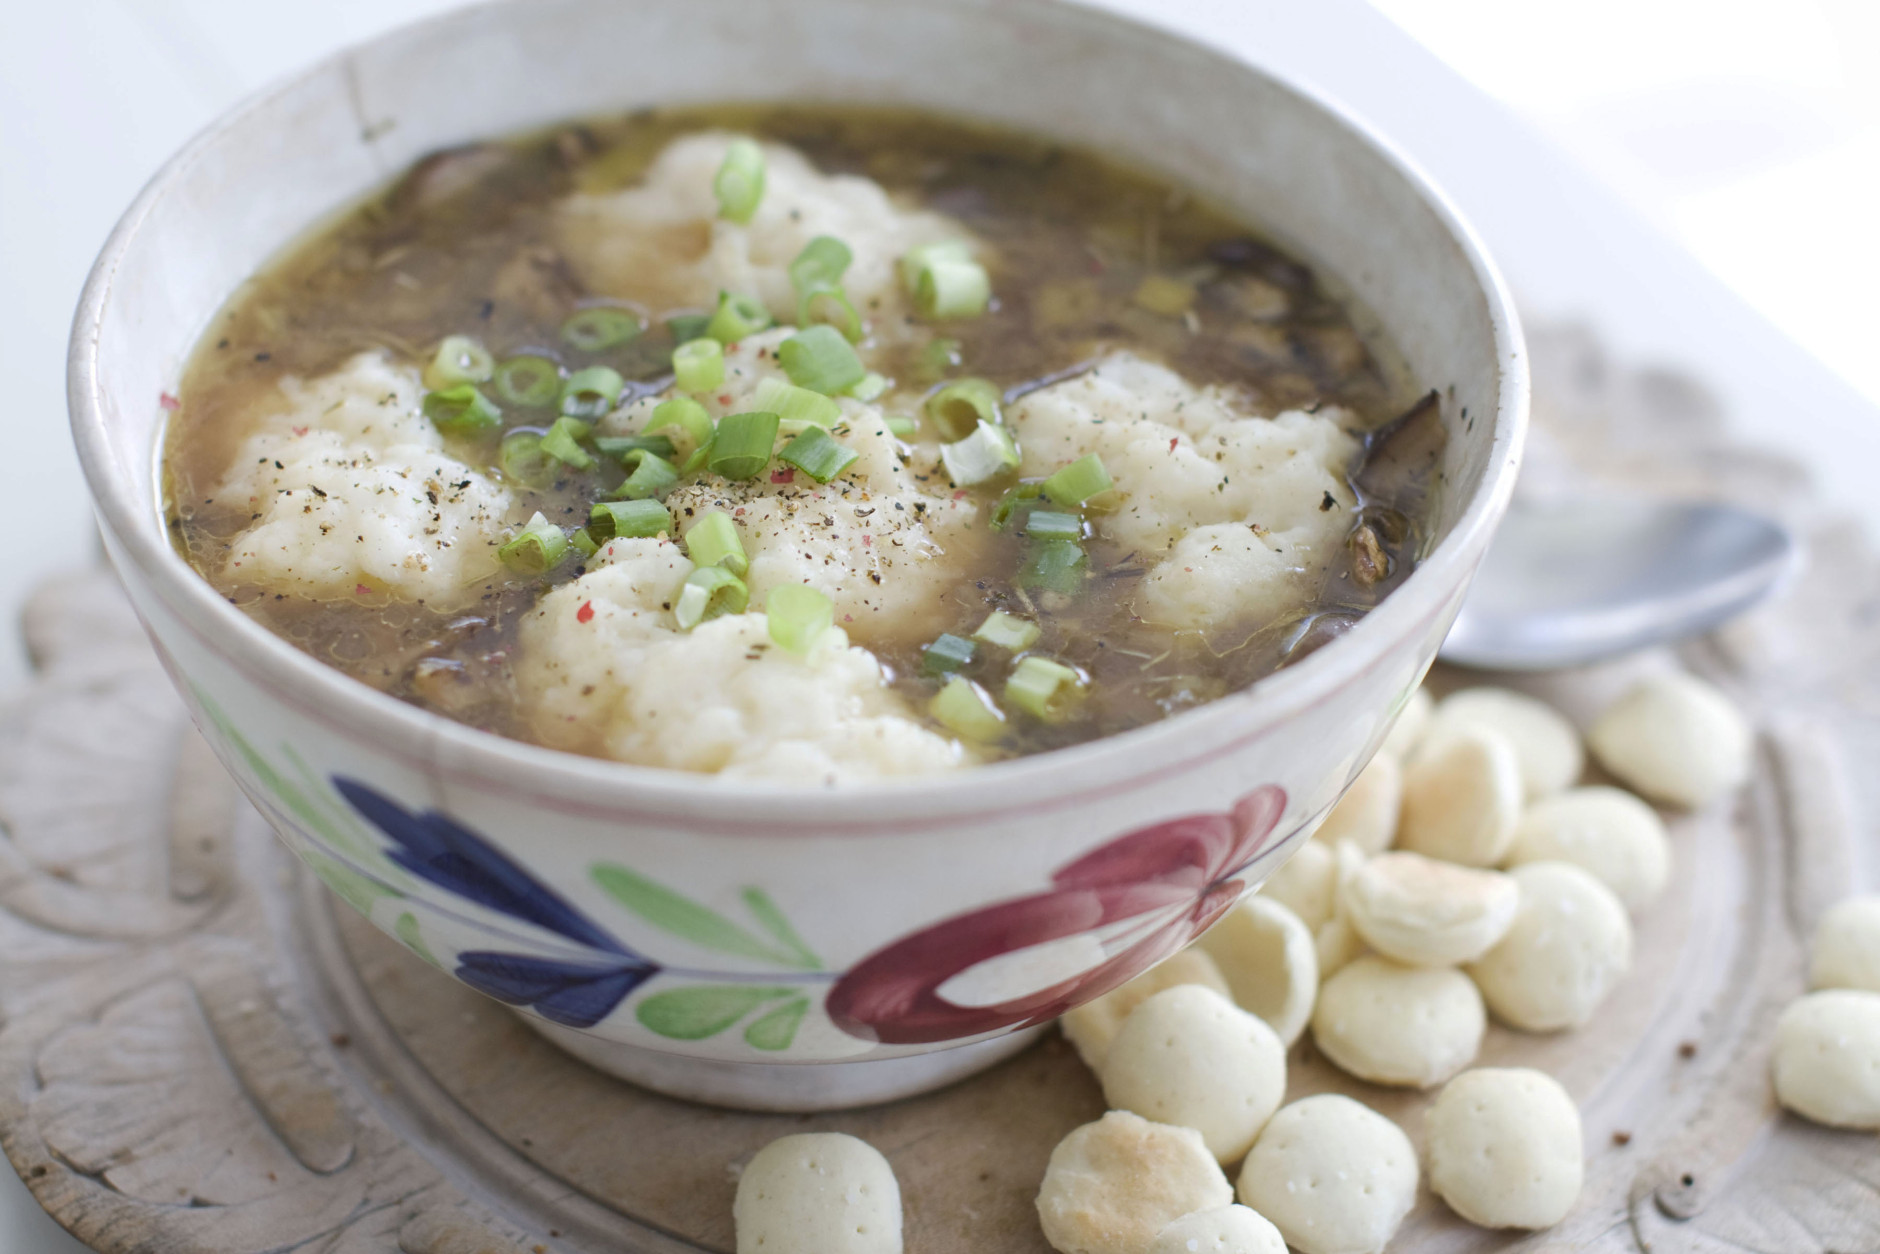 In this image taken on Sept. 17, 2012, a bowl of Mushroom and Chicken Barley Soup with Parmesan Dumplings is shown in Concord, N.H. (AP Photo/Matthew Mead)